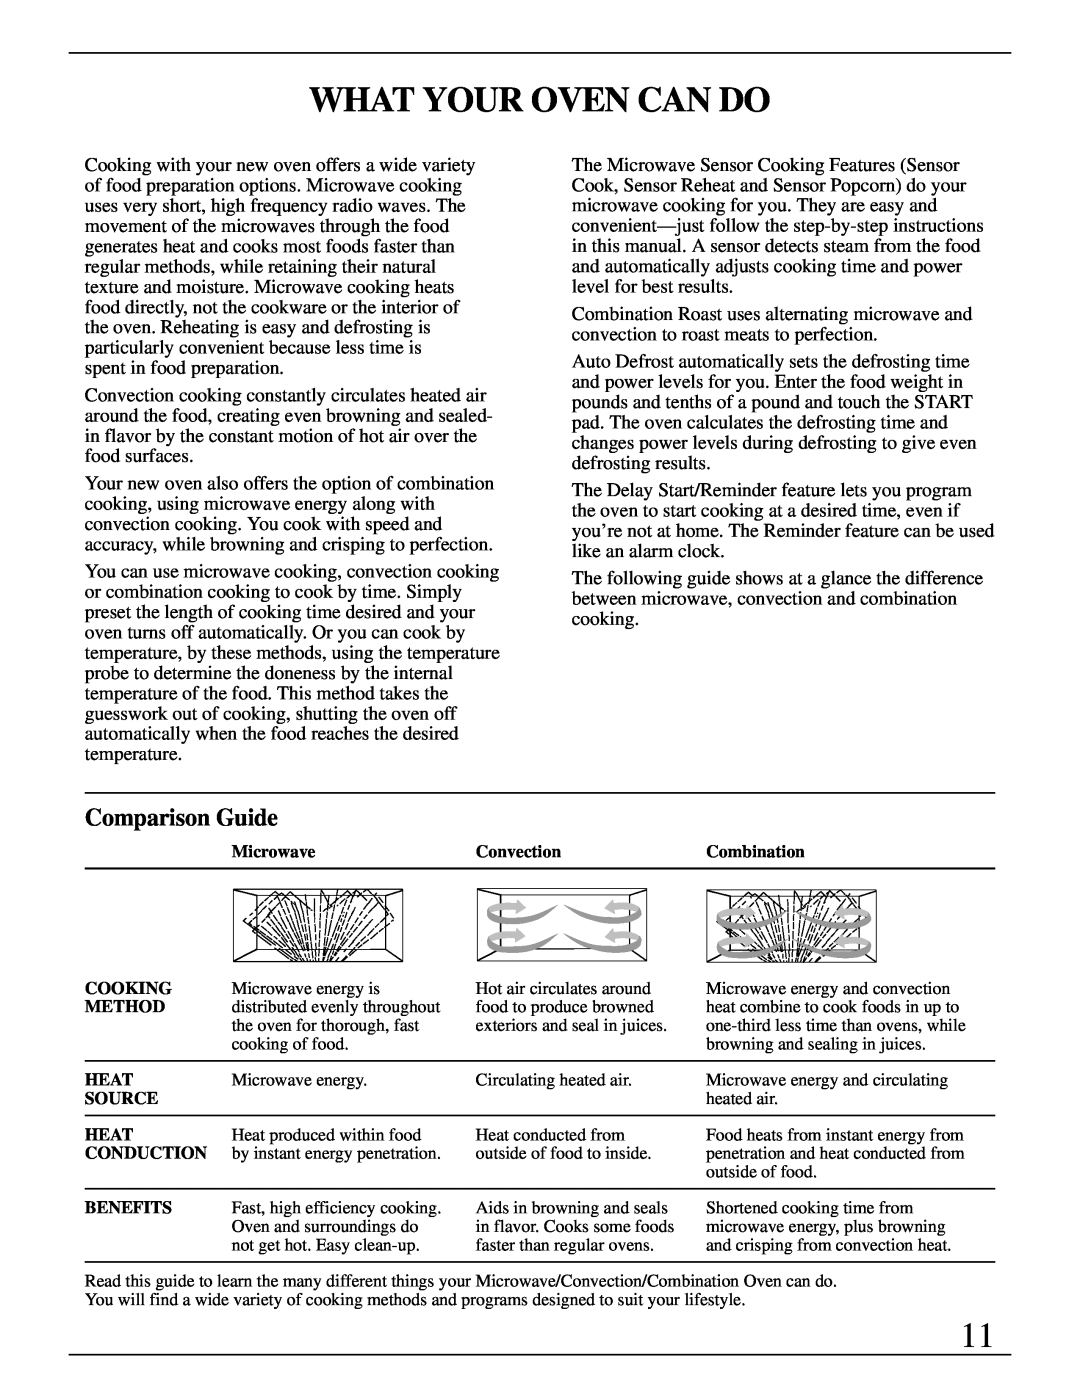 GE Monogram ZMC1090 Series manual What Your Oven Can Do, Comparison Guide 